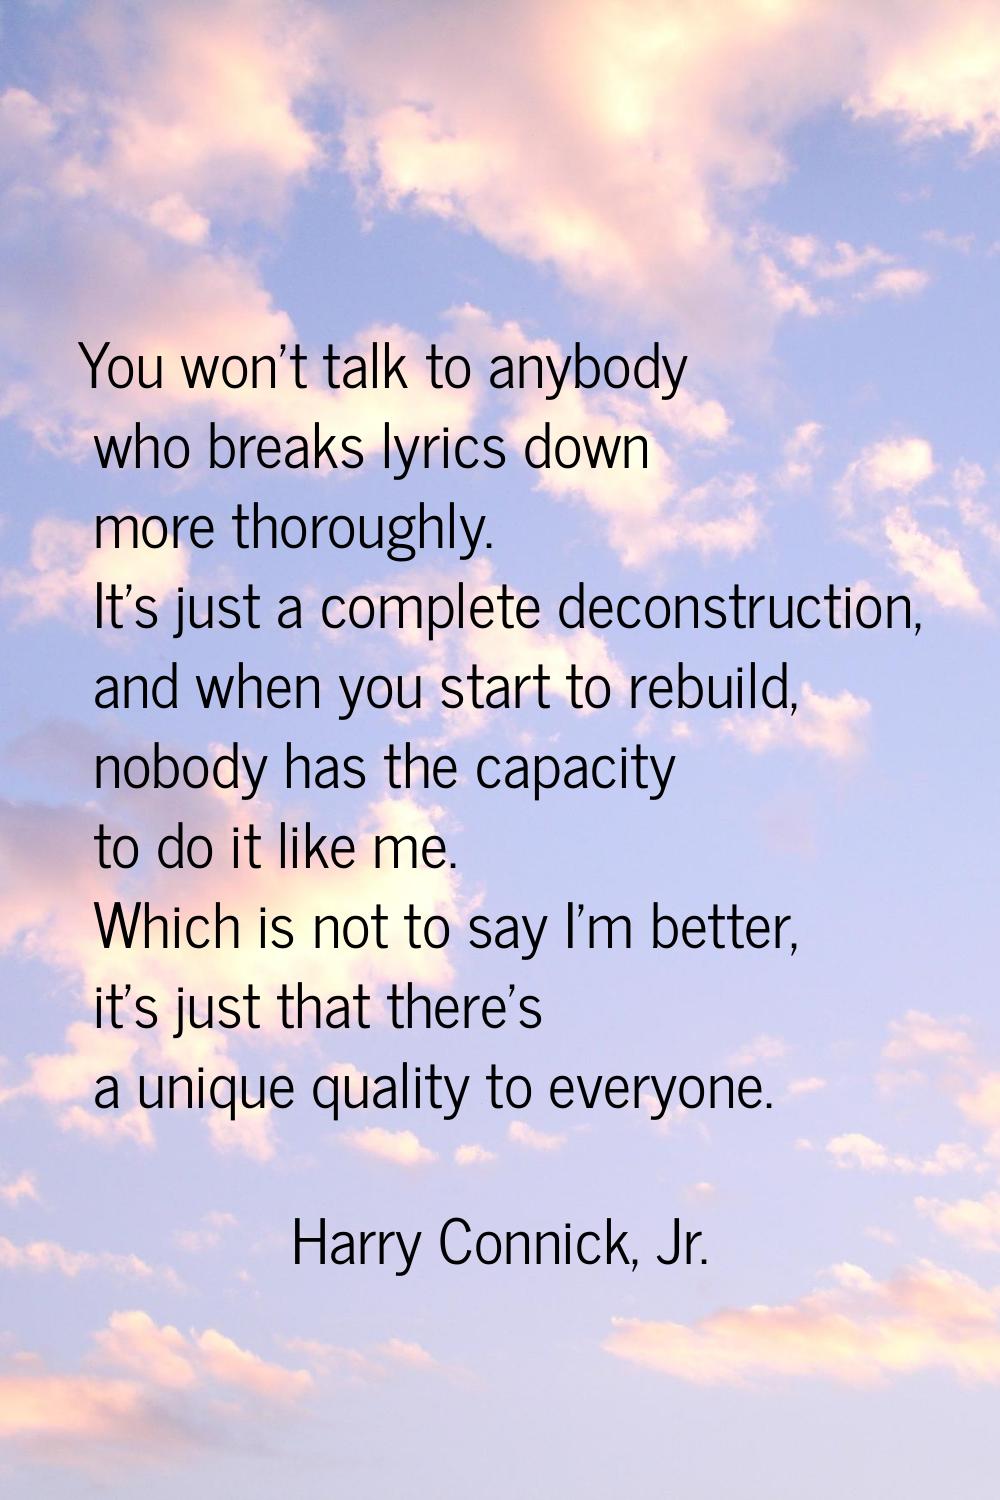 You won't talk to anybody who breaks lyrics down more thoroughly. It's just a complete deconstructi